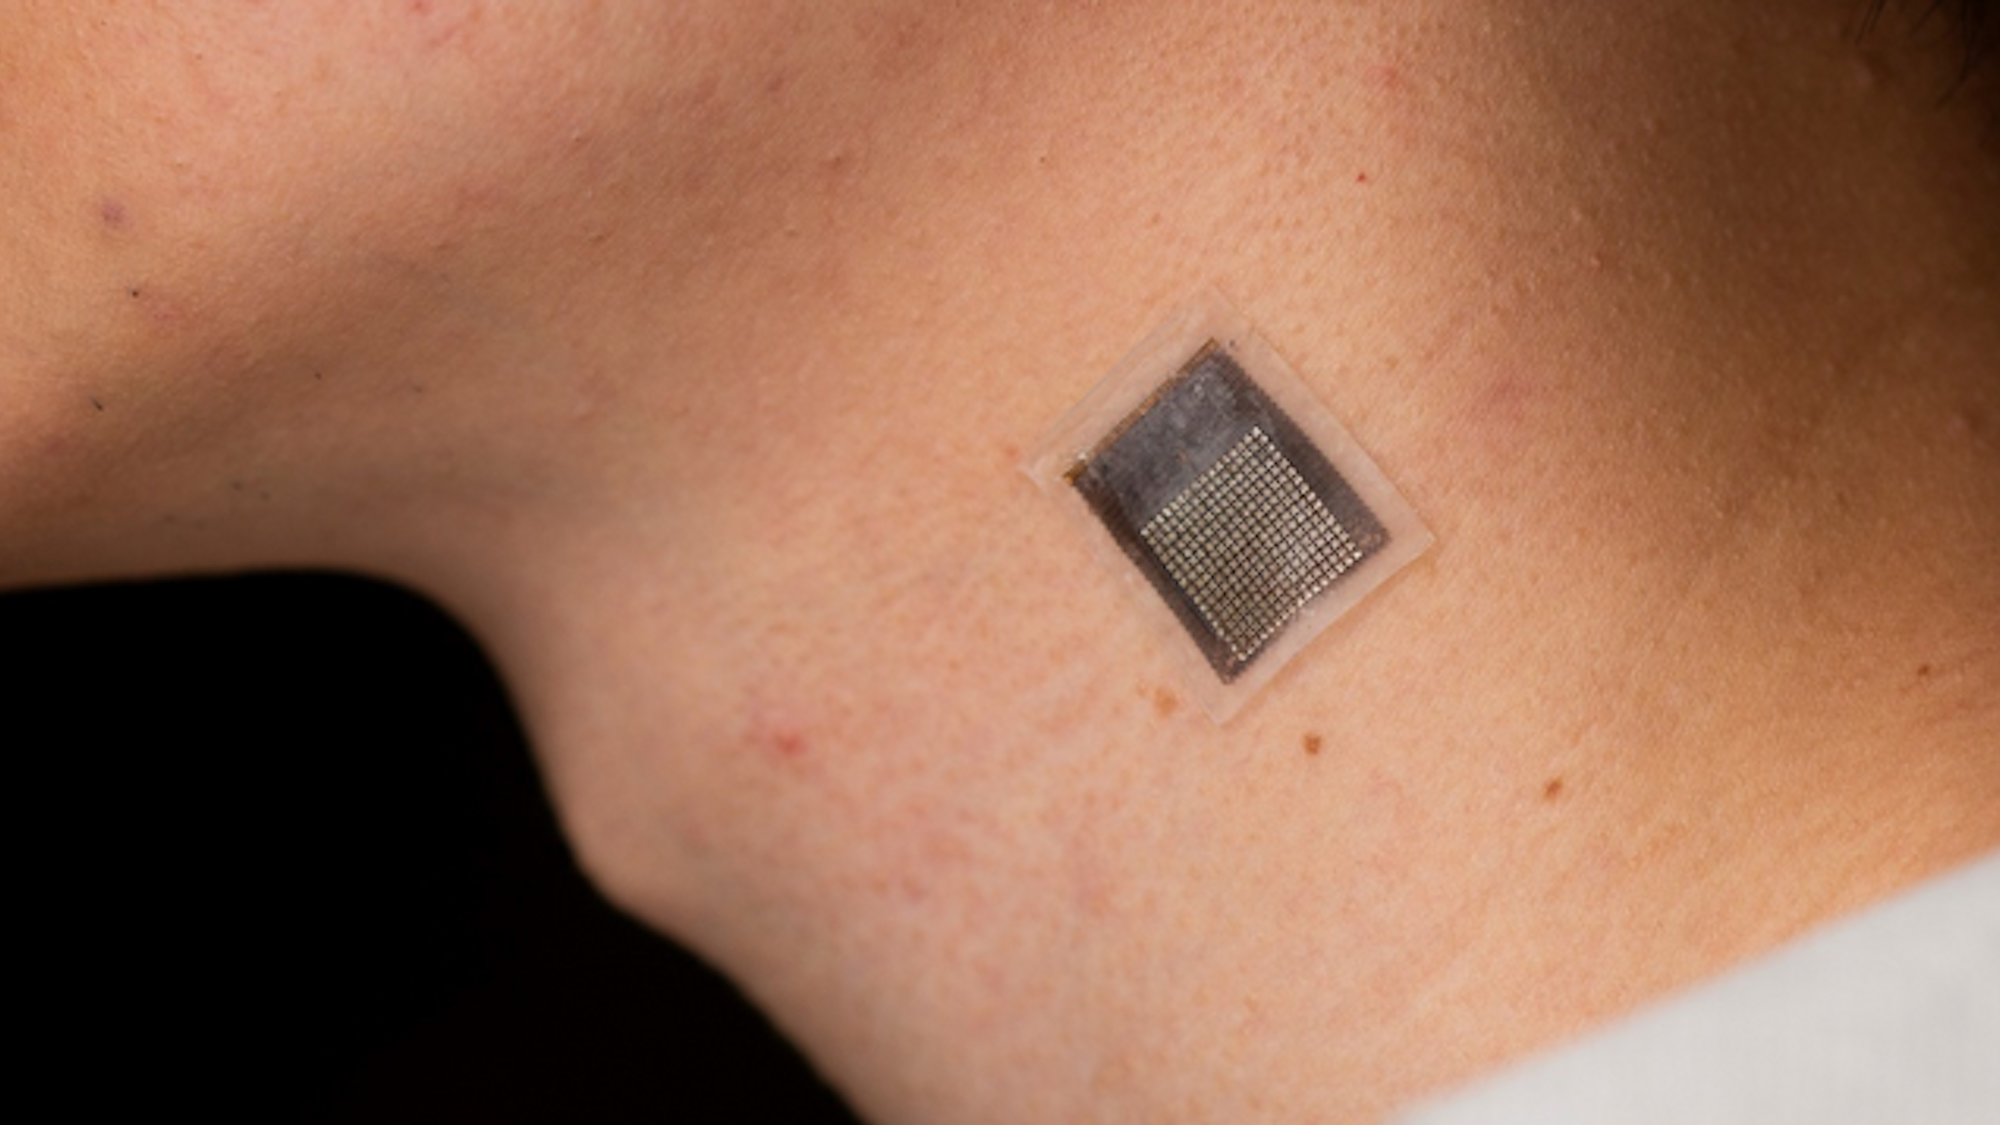 Close-up of patient's neck with a wearable ultrasound patch